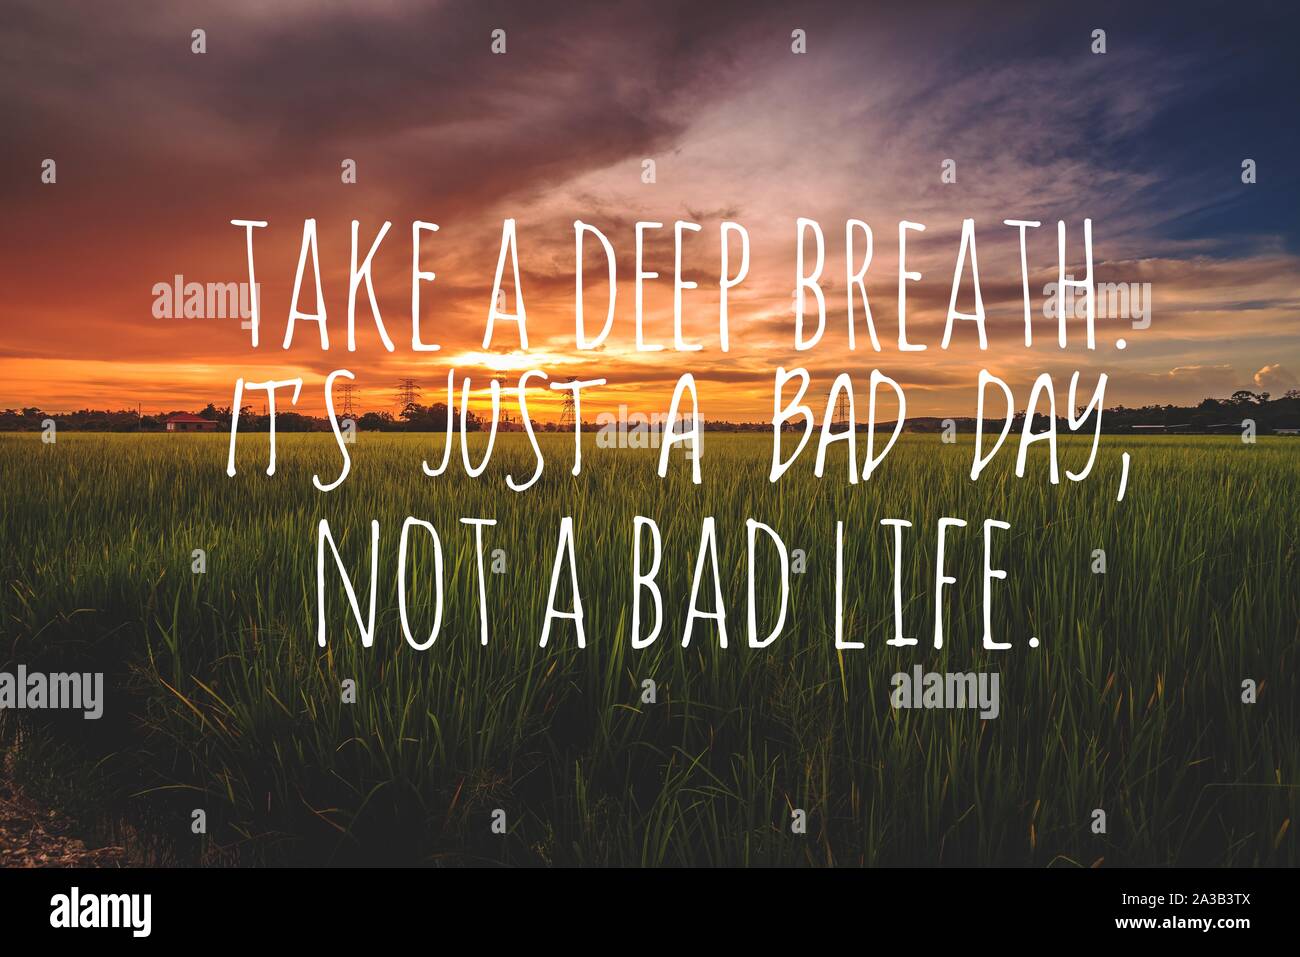 Motivational And Inspirational Quote Take A Deep Breath It S Just A Bad Day Not A Bad Life Stock Photo Alamy